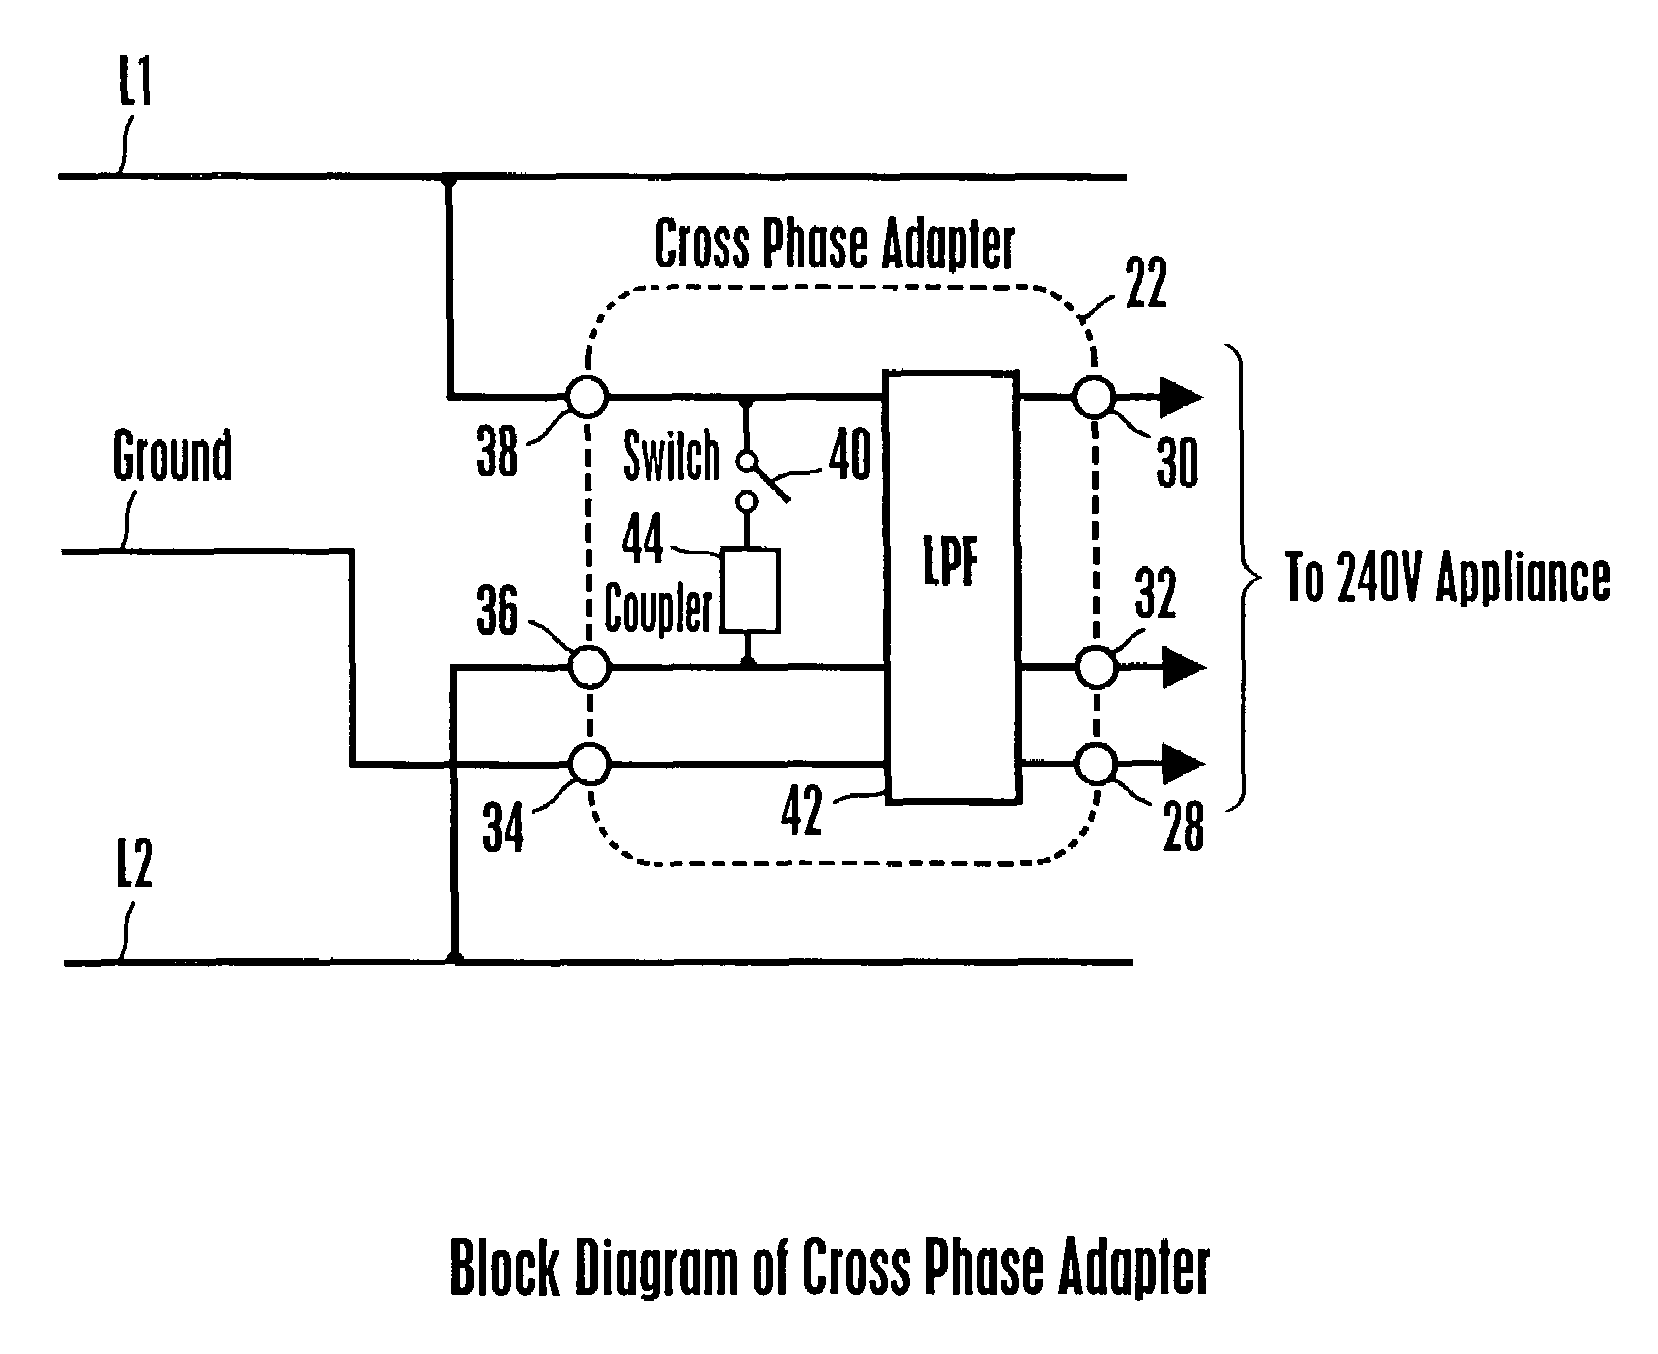 Cross-phase adapter for powerline communications (PLC) network